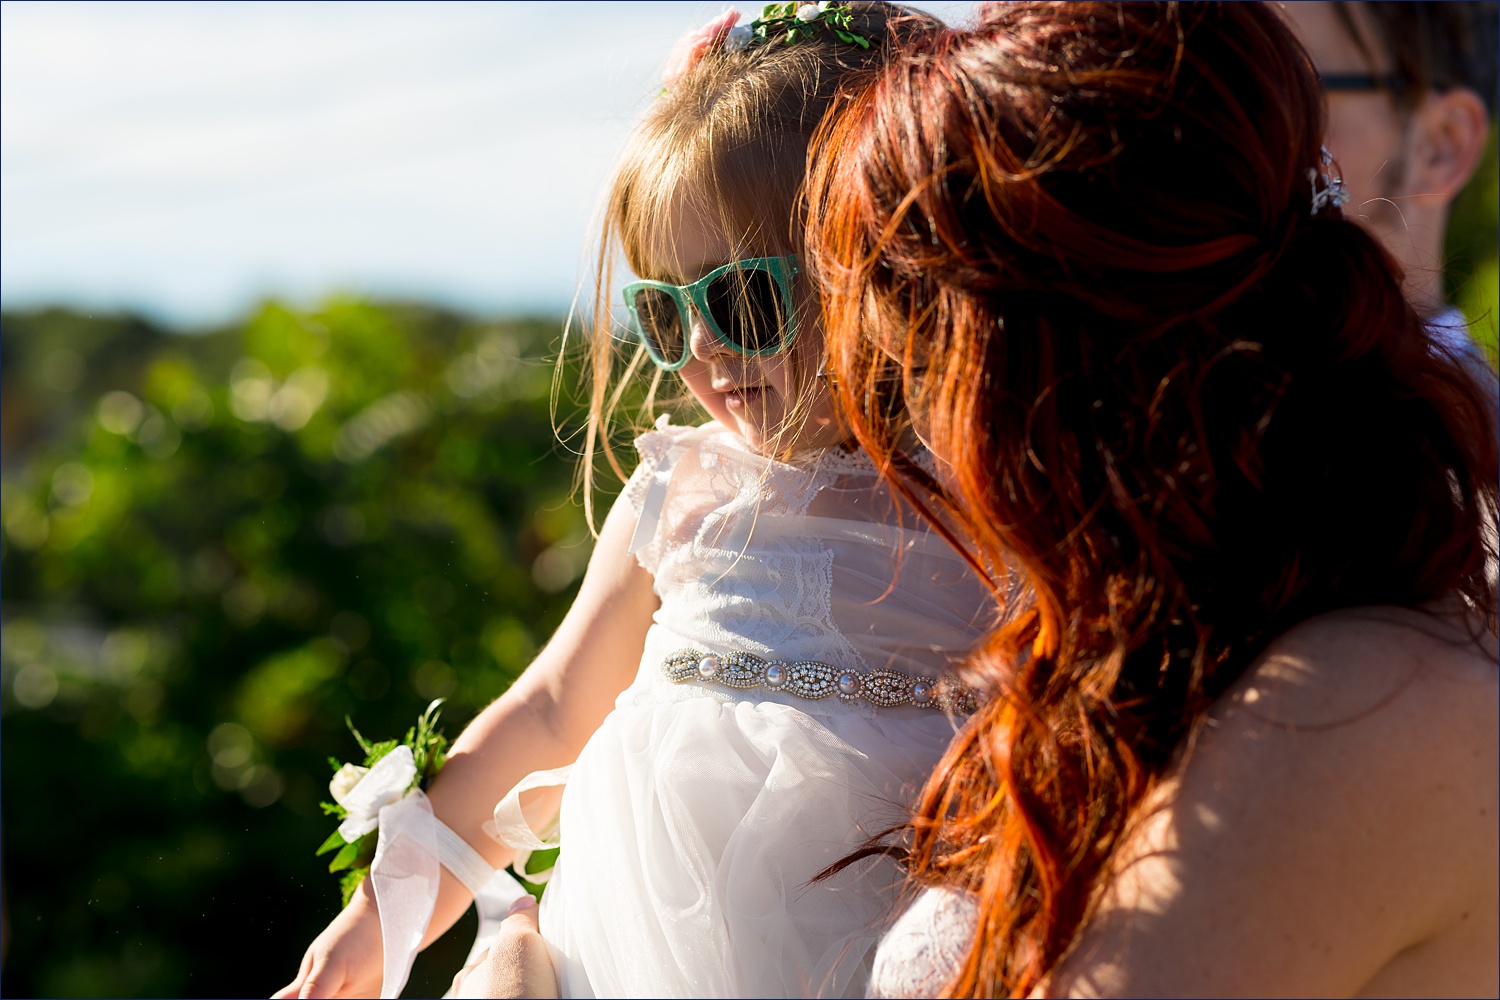 The flower girl snuggles with the bride after the wedding ceremony